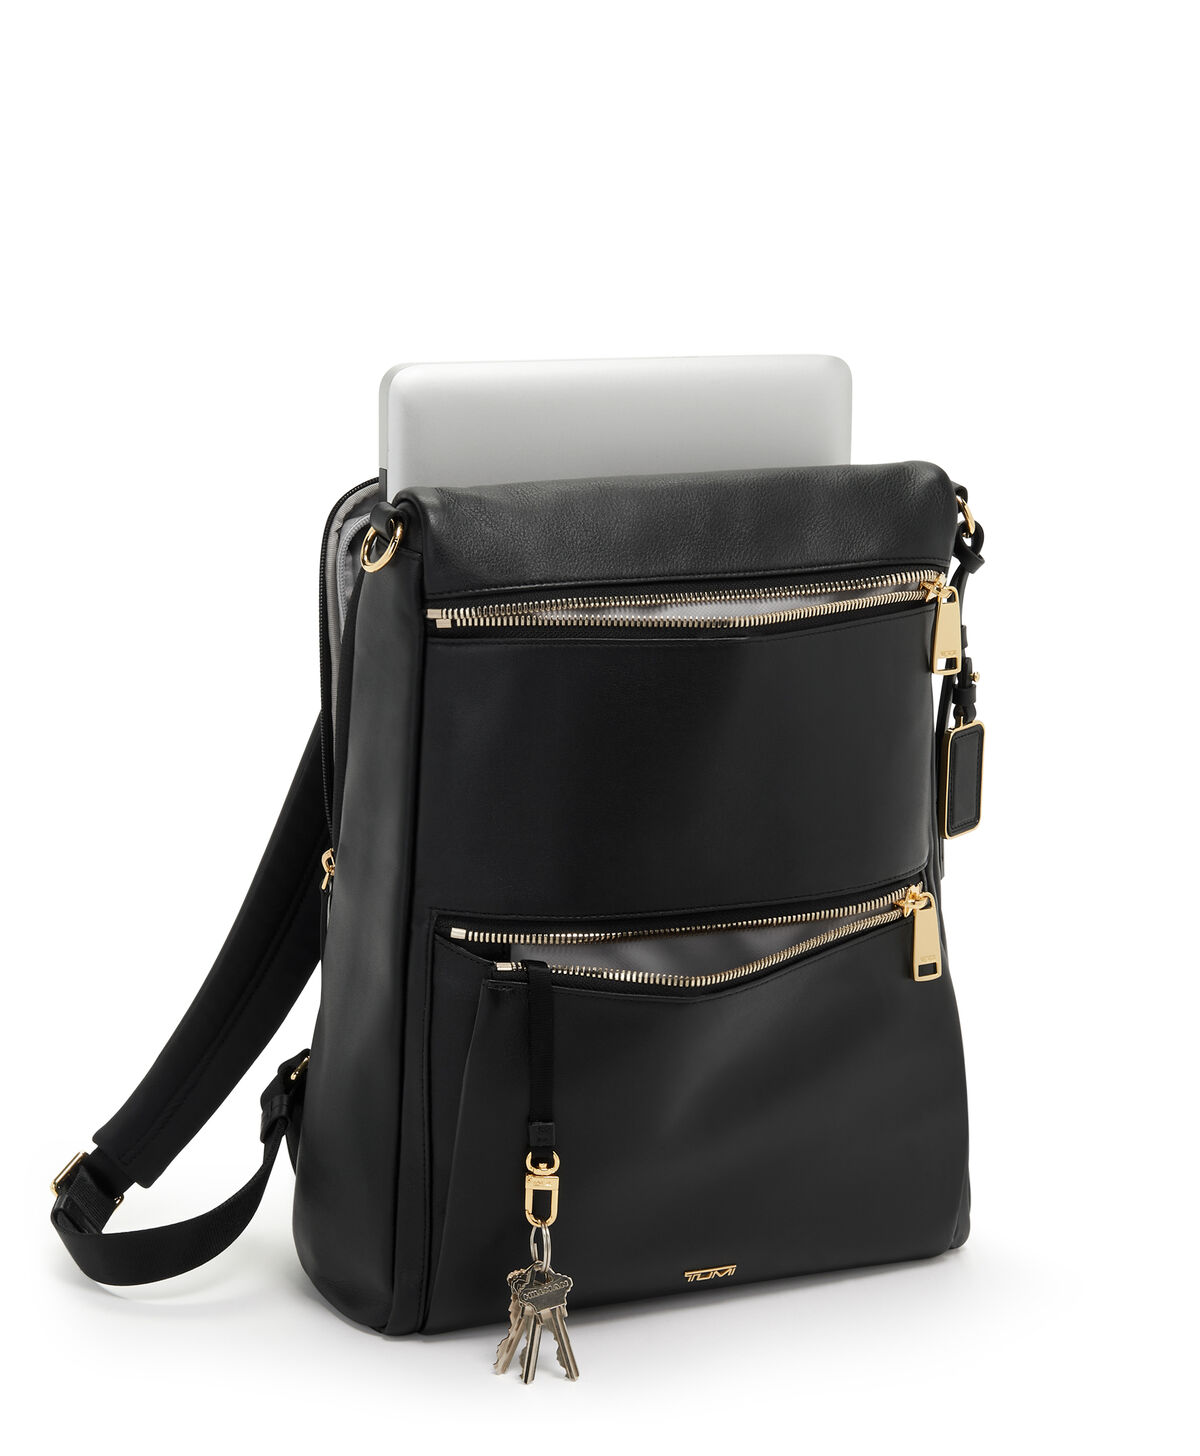  TUMI TUMI+ Charm Pouch - Black/Gold : Clothing, Shoes & Jewelry